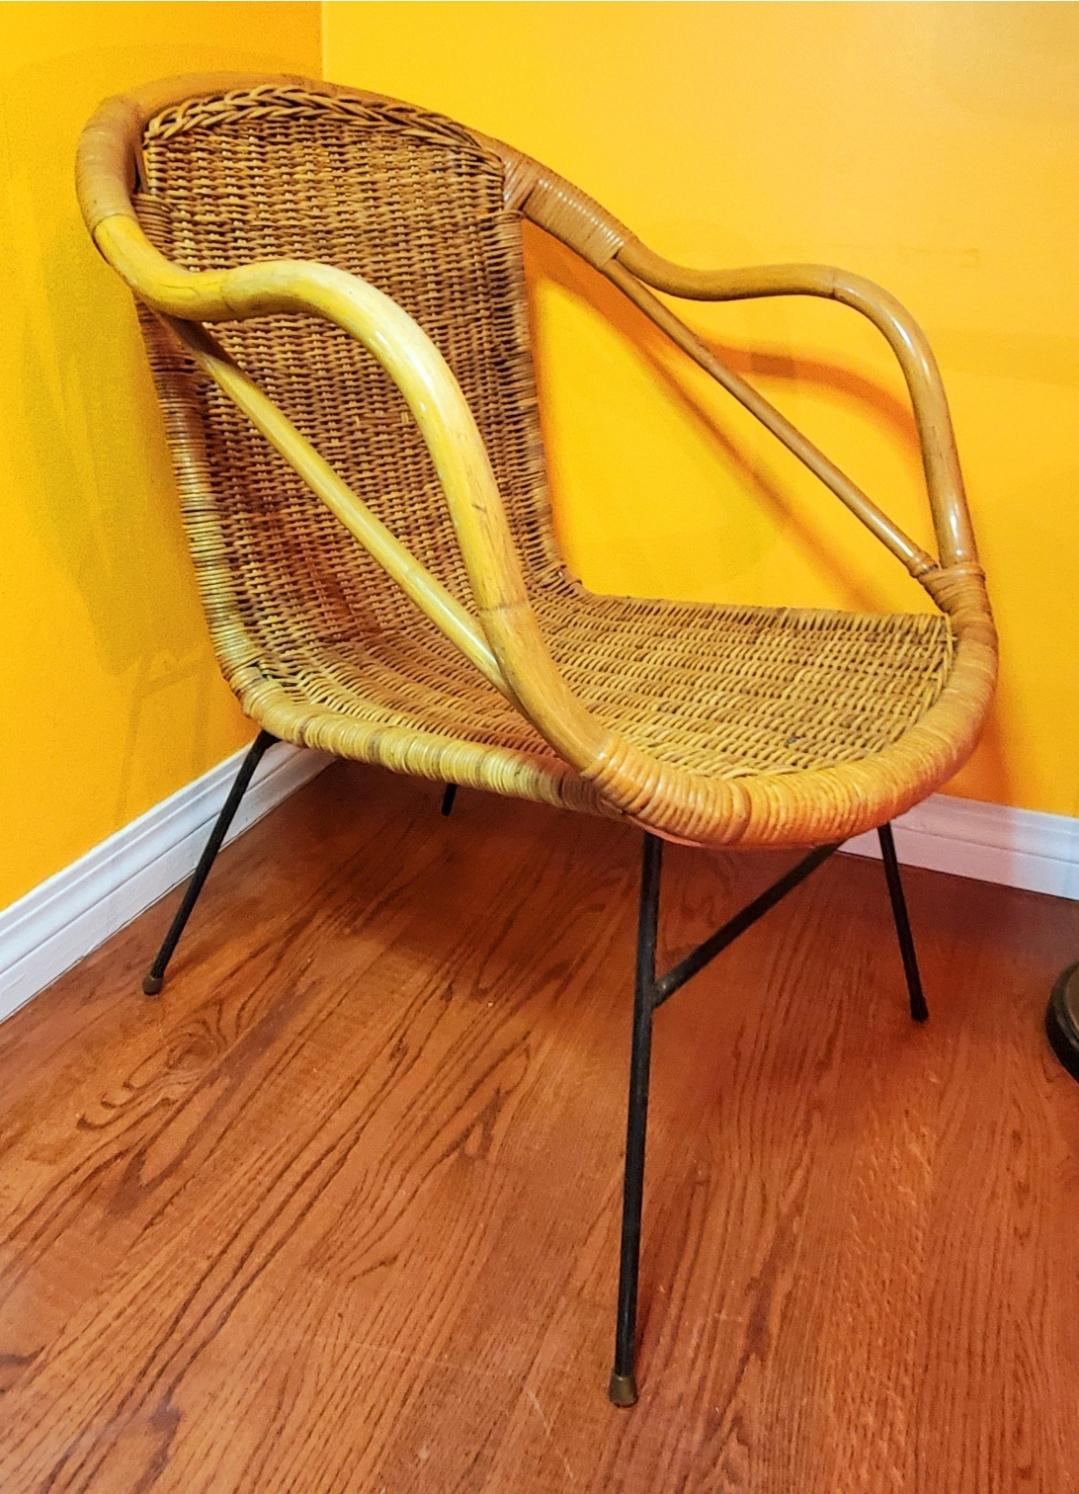 Got conflicting information on this one.
1950s Danish or Arthur Umanoff (style?)
Either way, it's a badass accent chair.
Wicker basket seat with rattan arms and supports.
Minor areas with broken wicker (pictured)
Doesn't affect functionality. 